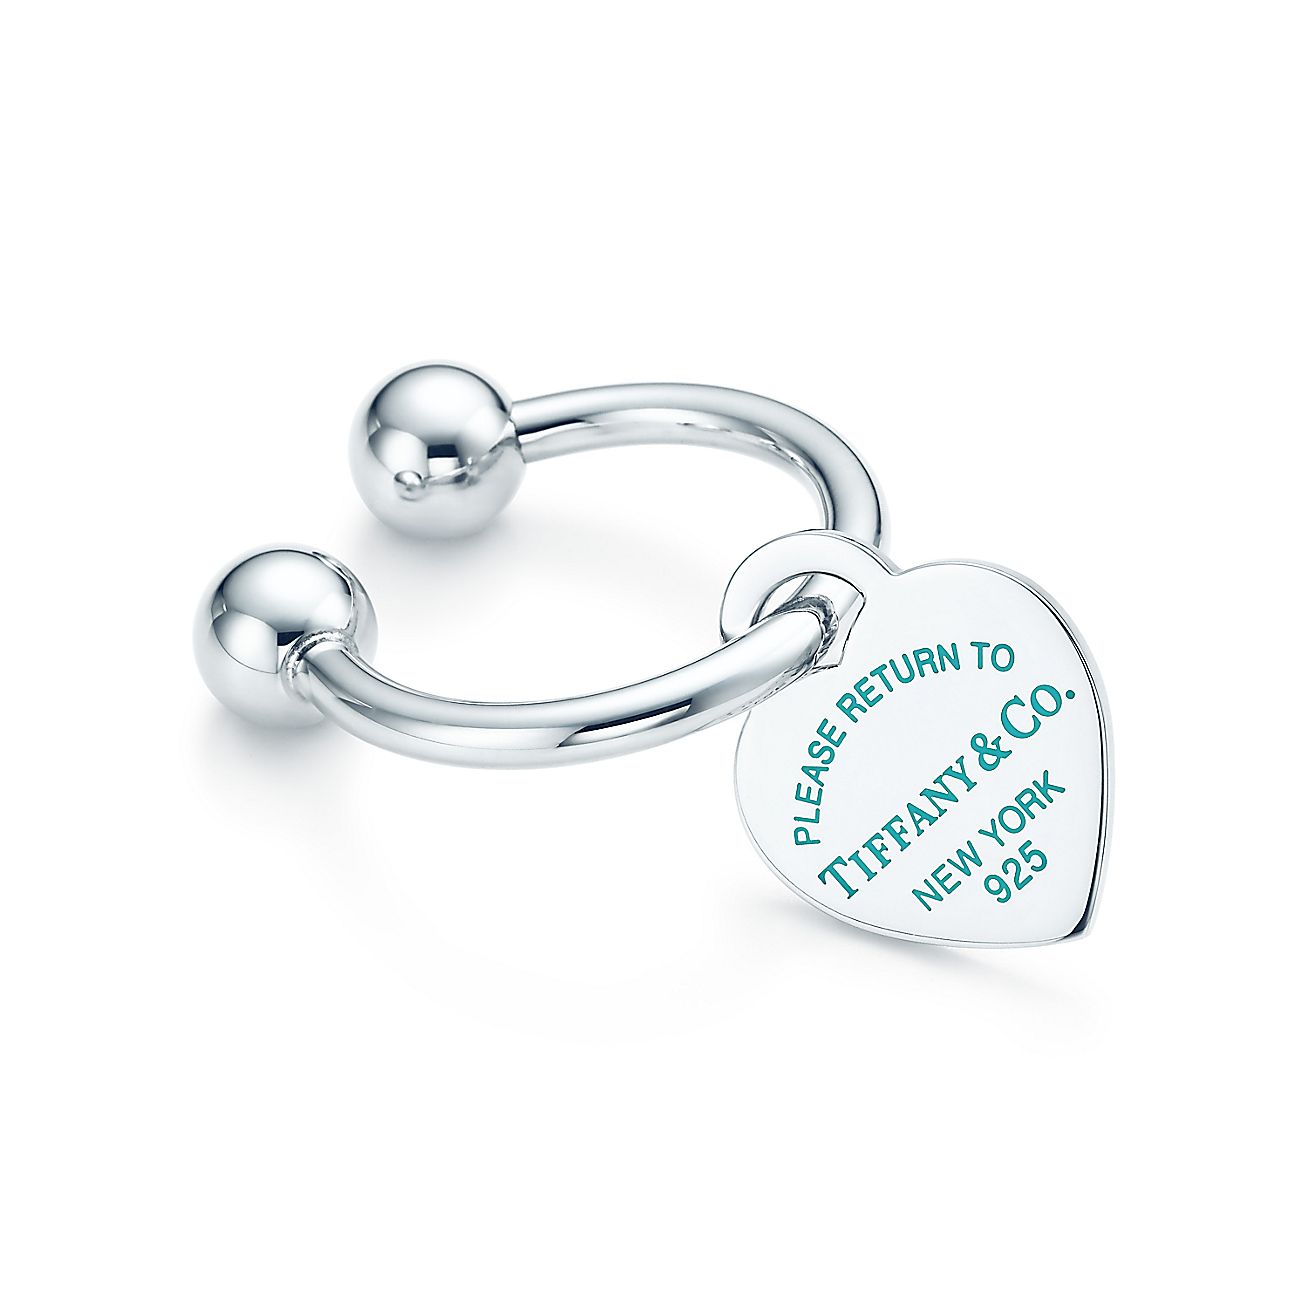 Return to Tiffany™ heart tag key ring in sterling silver with enamel